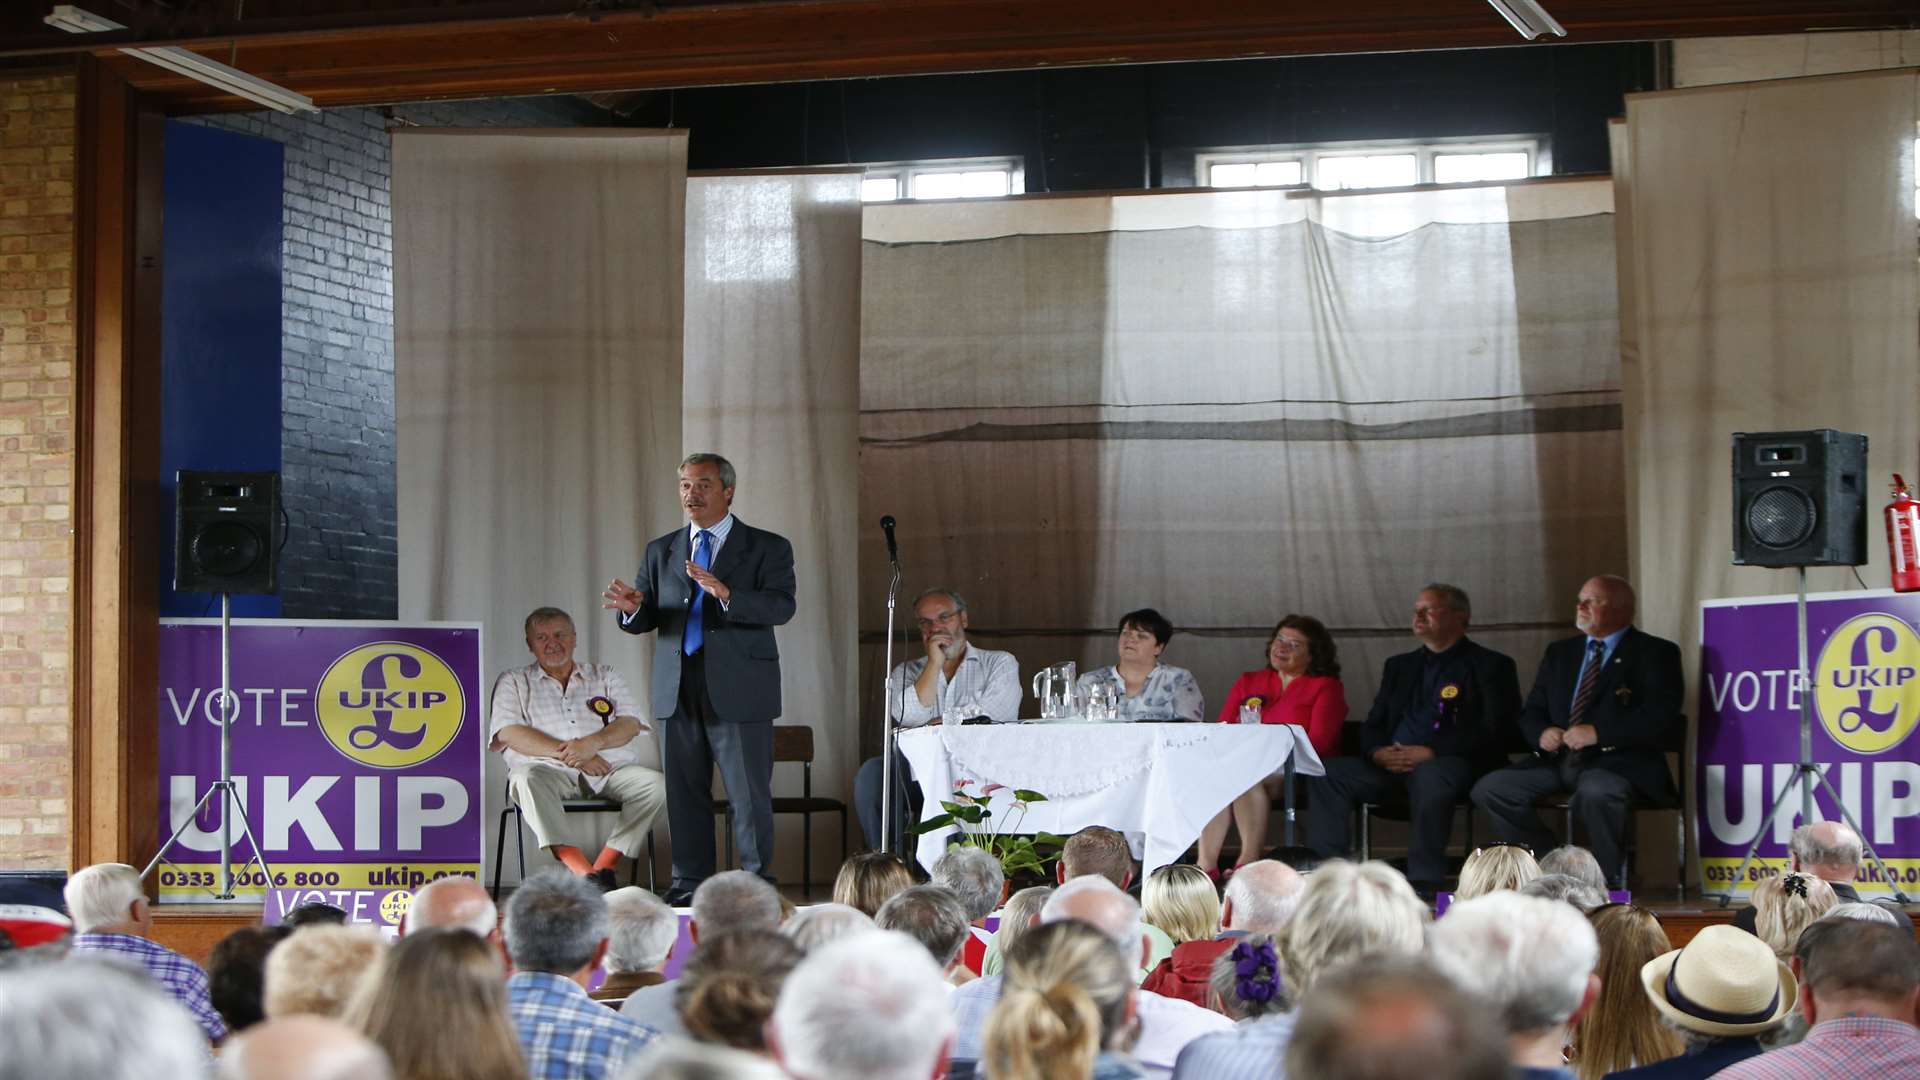 Nigel Farage addresses the hall about the Northwood by-election